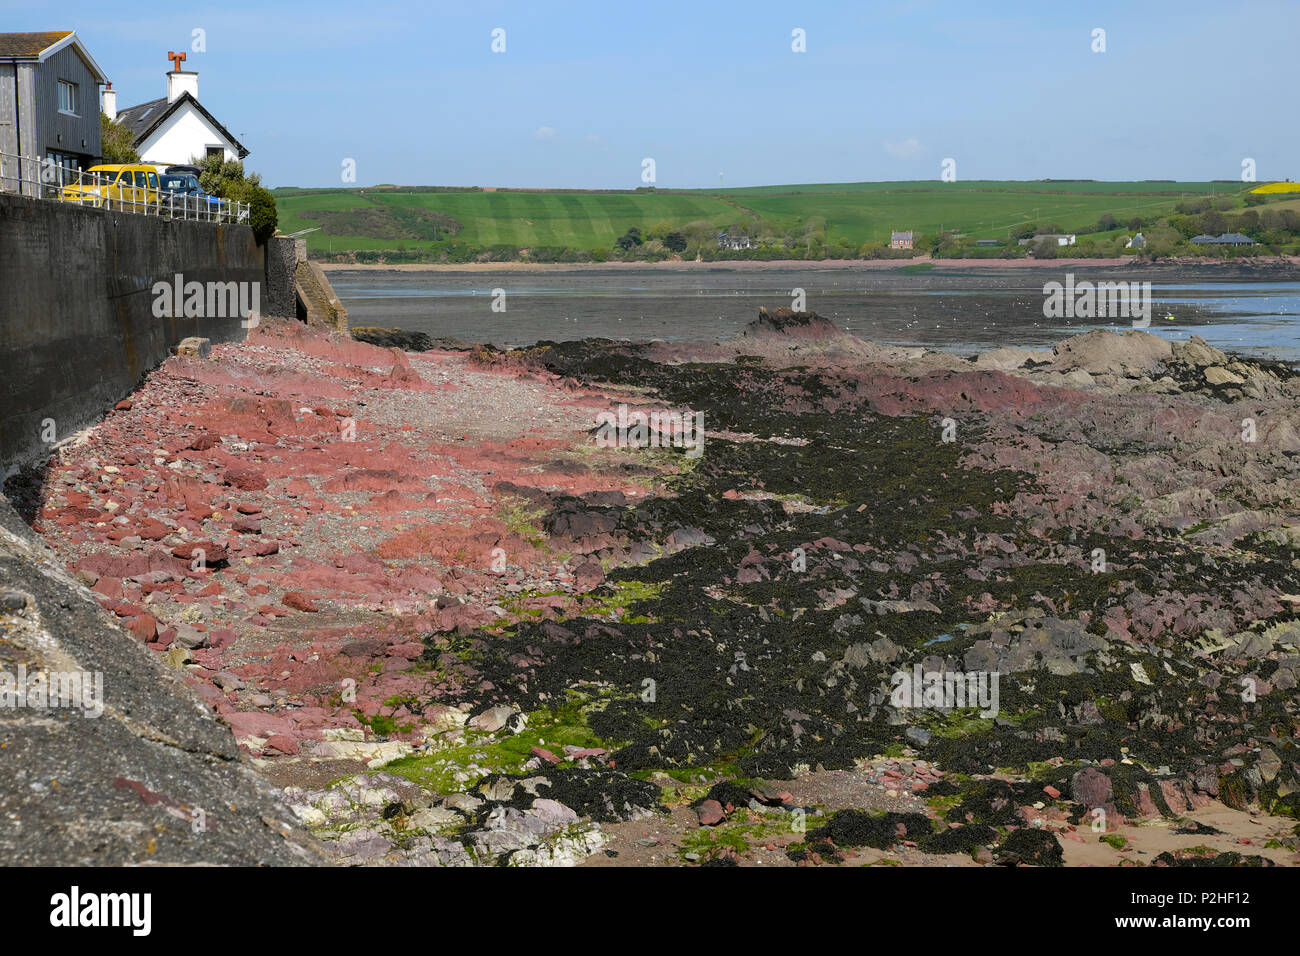 Rocky shore and view across the bay at low tide on the Welsh coast at Dale in Pembrokeshire West Wales UK  KATHY DEWITT Stock Photo